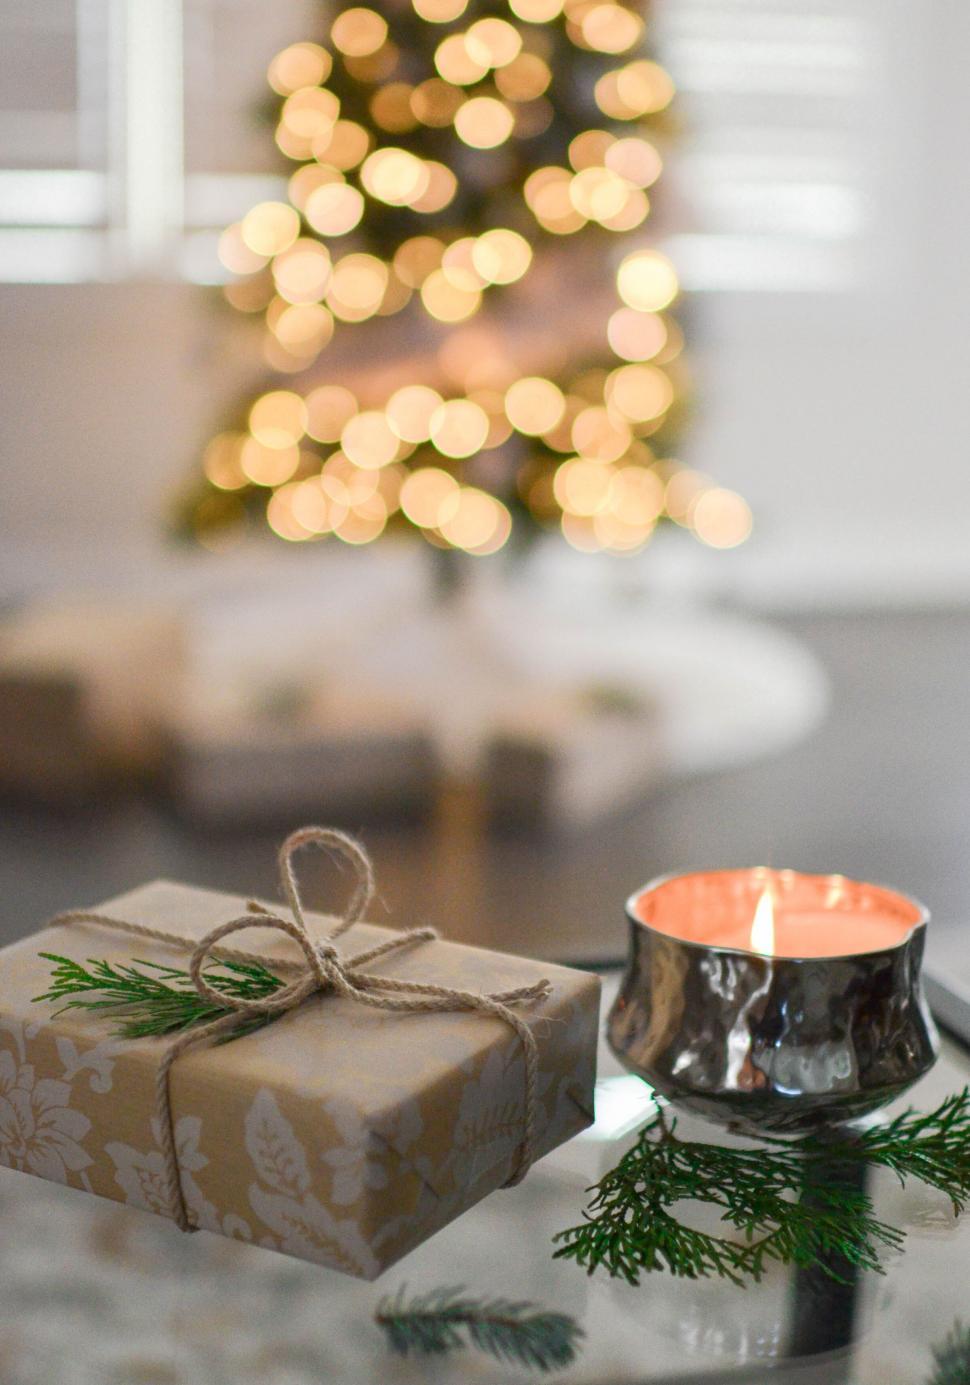 Free Image of Gift and candle with Christmas tree in background 